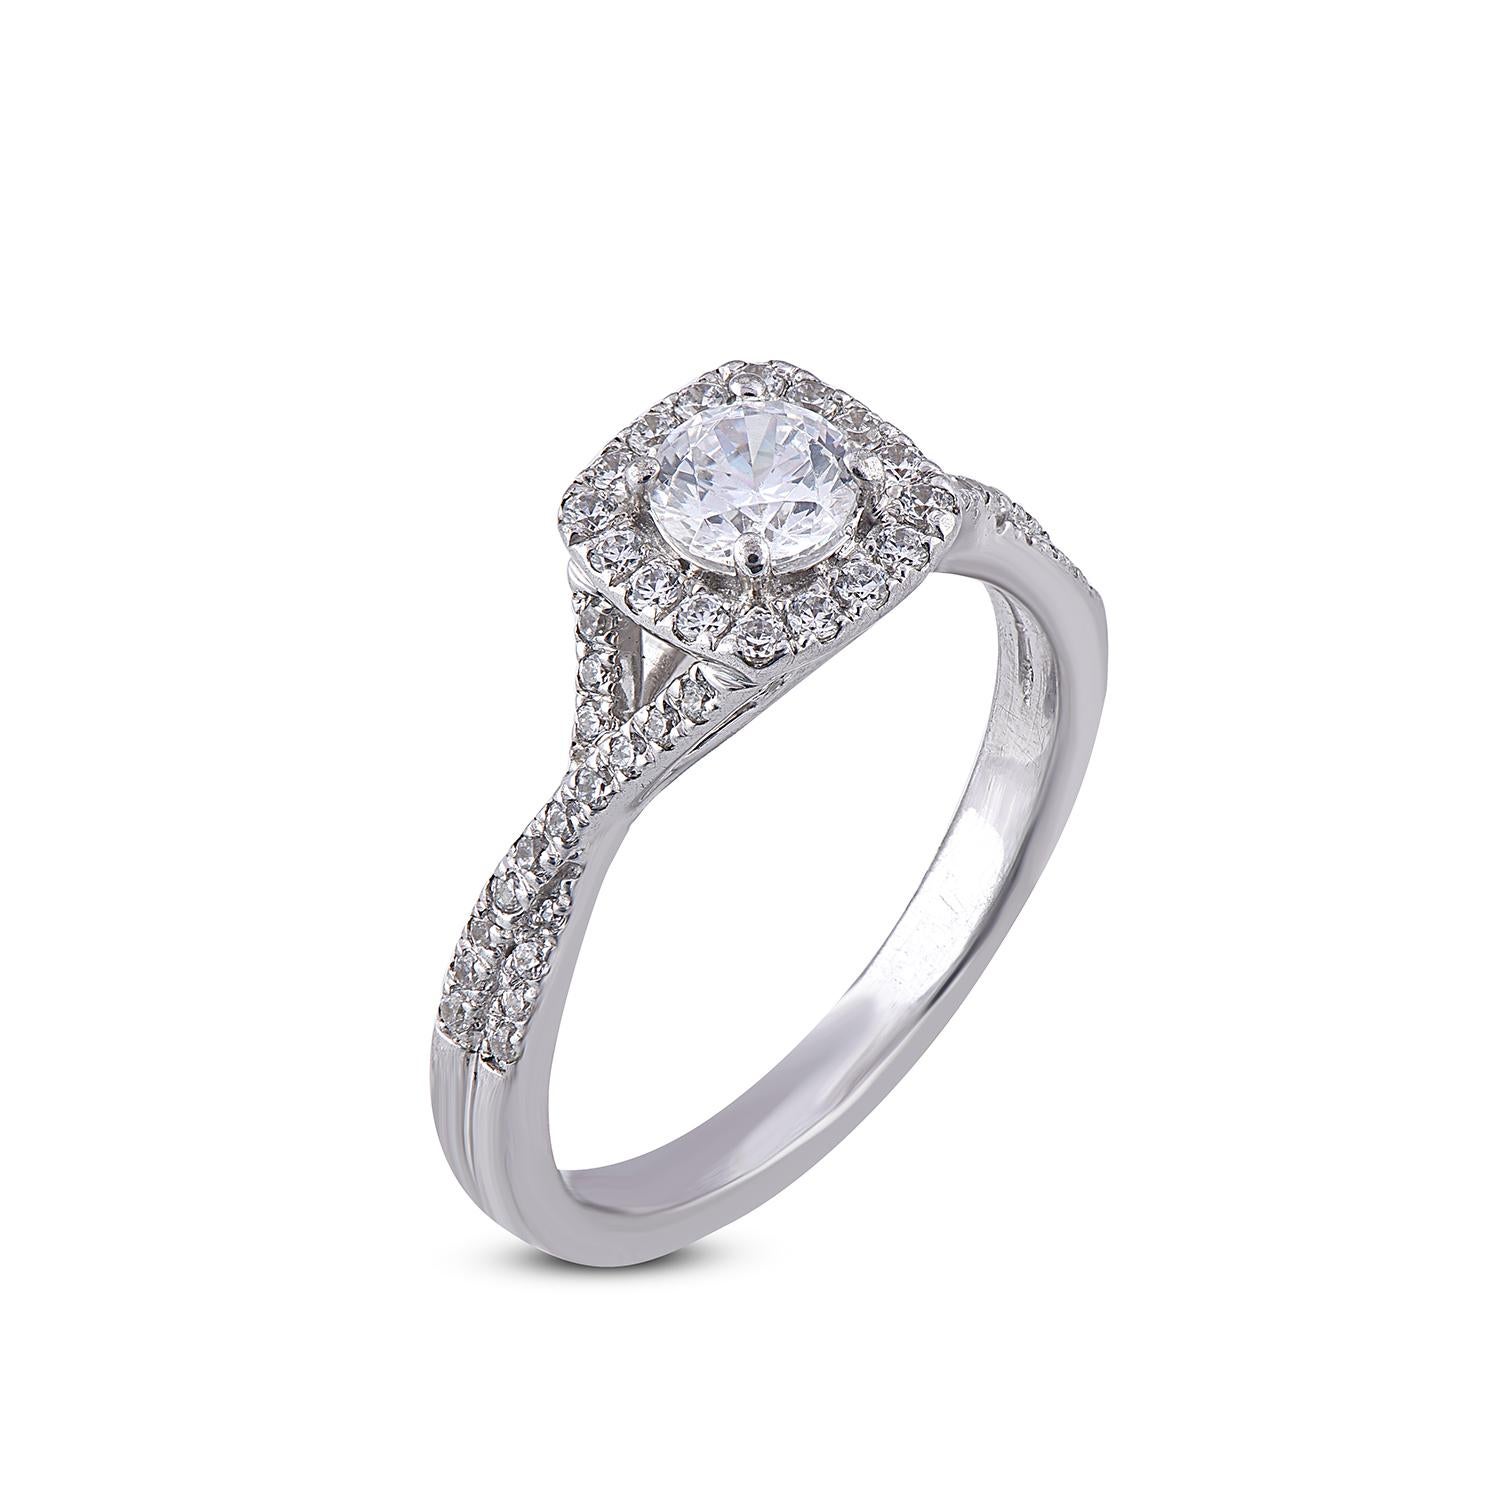 This gorgeous engagement ring is studded with 63 round diamonds 0.43 ct of centre stone and 0.32 ct in frame and shank set in Pave and Prong setting and crafted in 18 Karat White Gold. Diamonds are graded G-H color and SI1-2 clarity.
